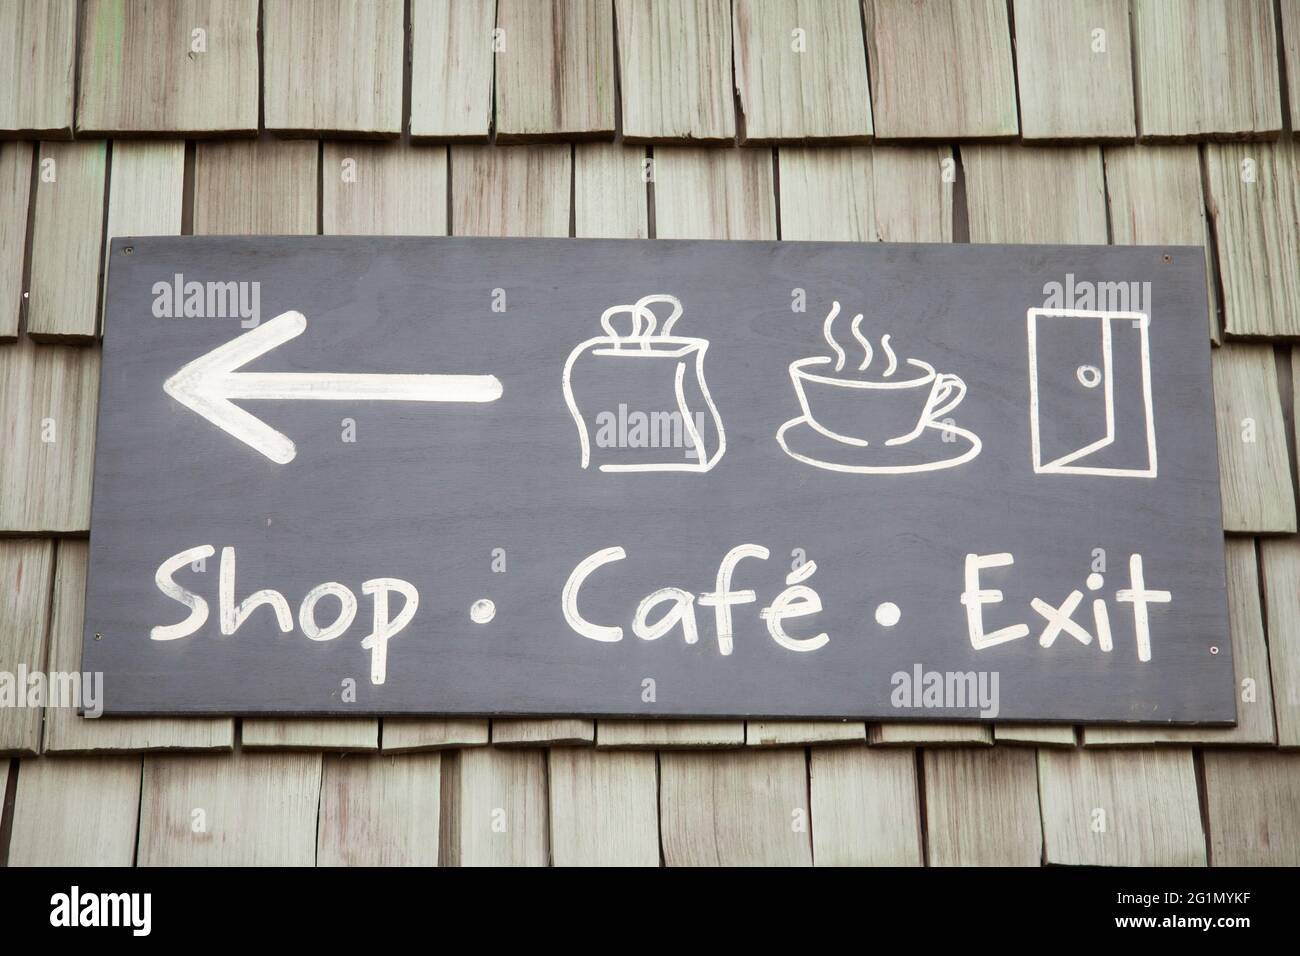 Shop Cafe Exit sign at Eden Project Botanical garden in Bodelva, Cornwall, UK, May 2021 Stock Photo